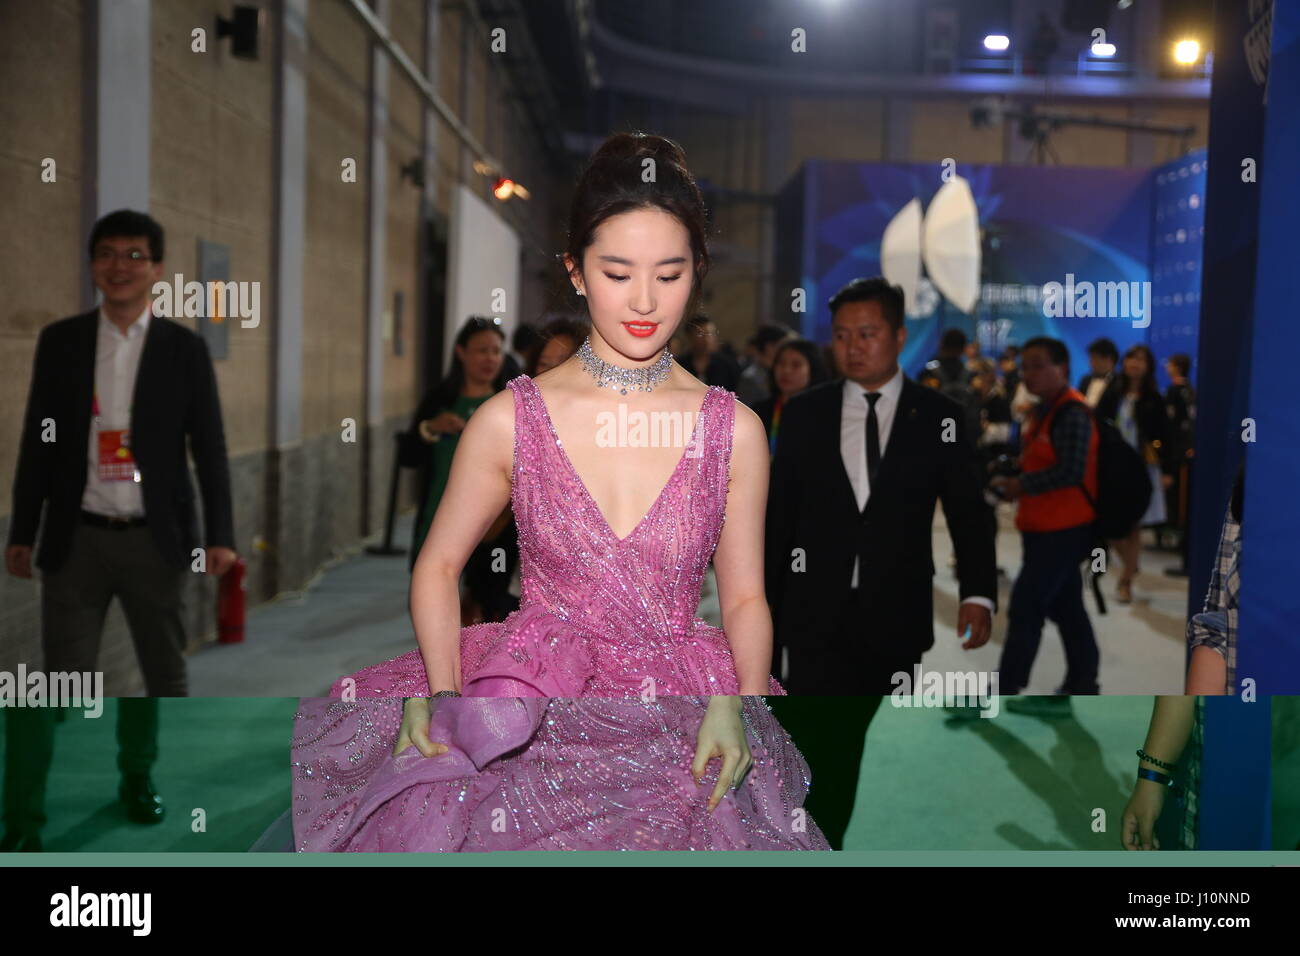 Beijing, Beijing, China. 16th Apr, 2017. Beijing, CHINA-April 16 2017: (EDITORIAL USE ONLY. CHINA OUT) Chinese actress Crystal Liu Yifei. Backstage photo of the 7th Beijing International Film Festival red carpet. Credit: SIPA Asia/ZUMA Wire/Alamy Live News Stock Photo